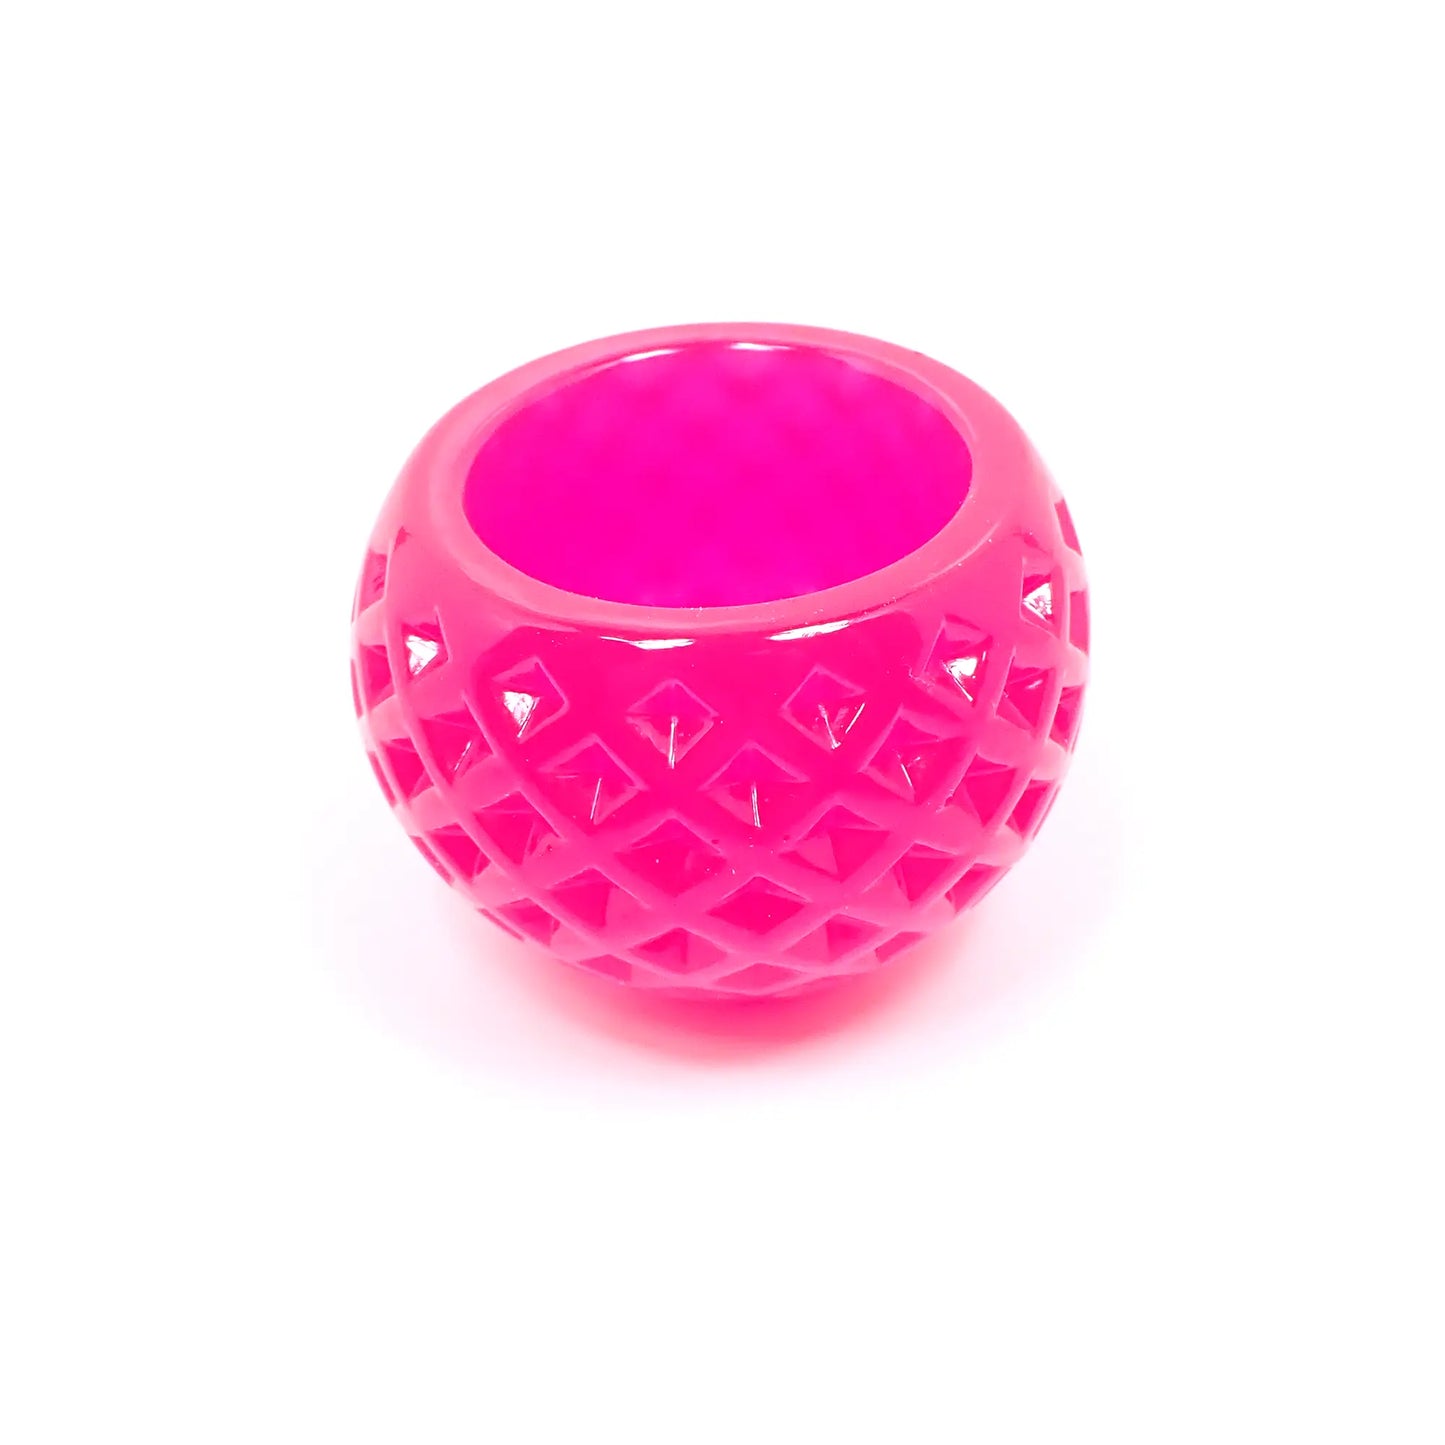 Small Neon Pink Resin Handmade Succulent Pot, Round Decorative Bowl with Indented Diamond Shape Pattern